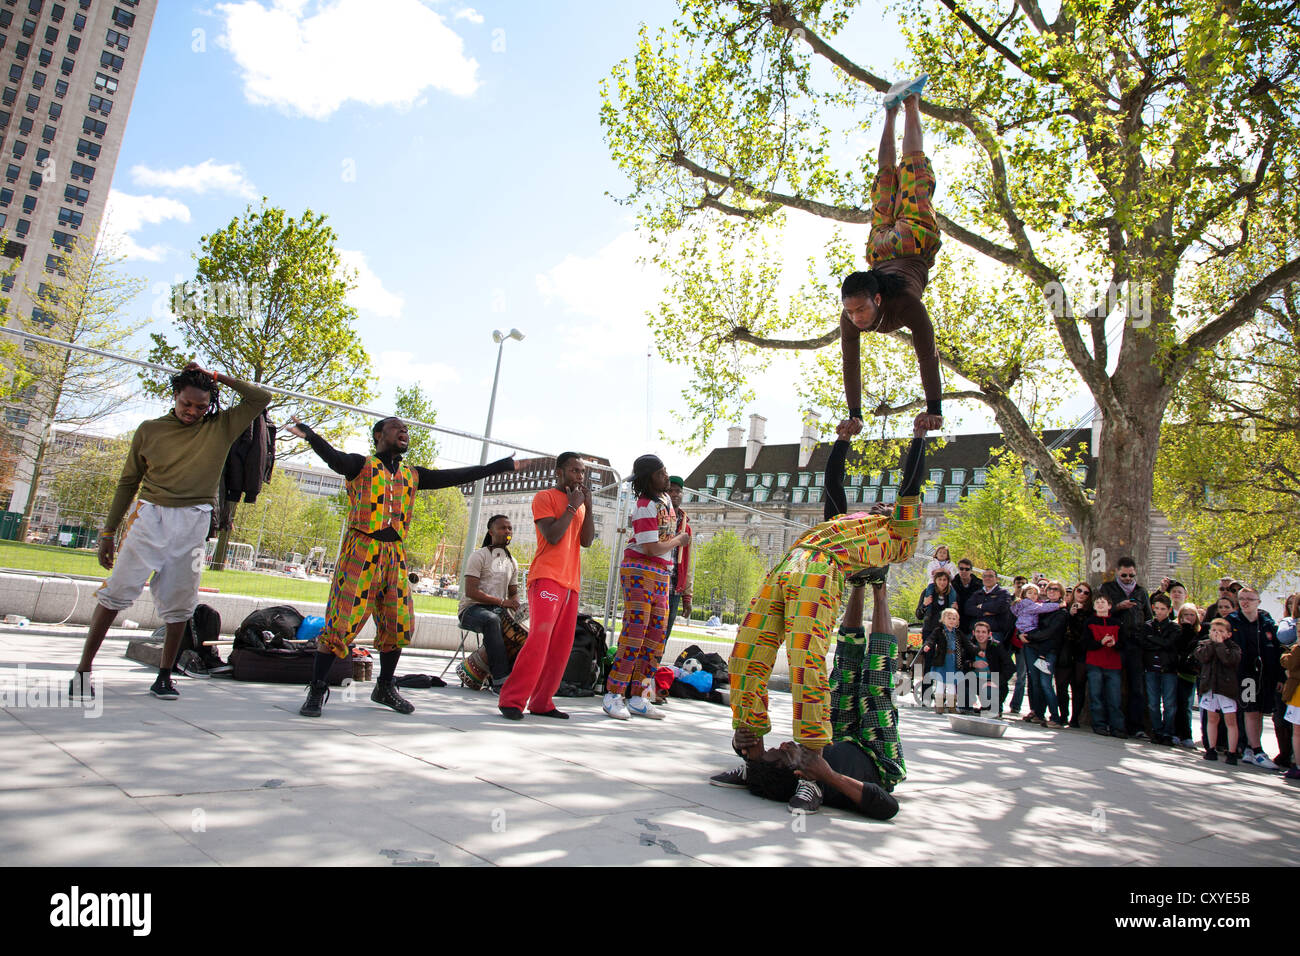 England. London. South Bank. African street performers. Acrobatics. Stock Photo